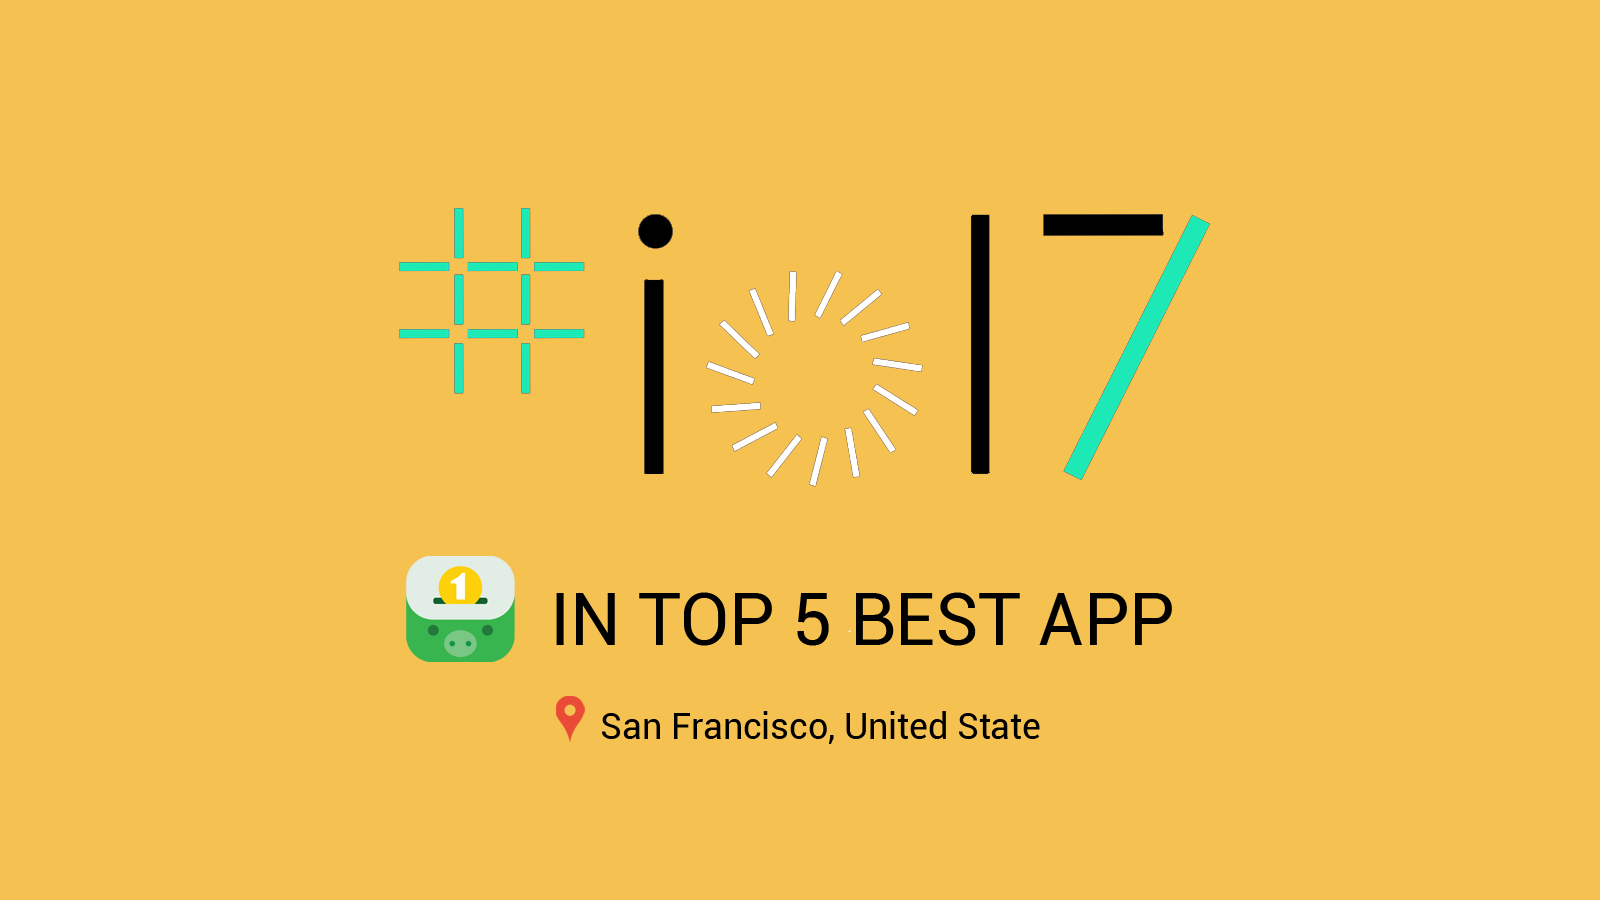 Money Lover to be nominated in top 5 best app at Google I/O 2017